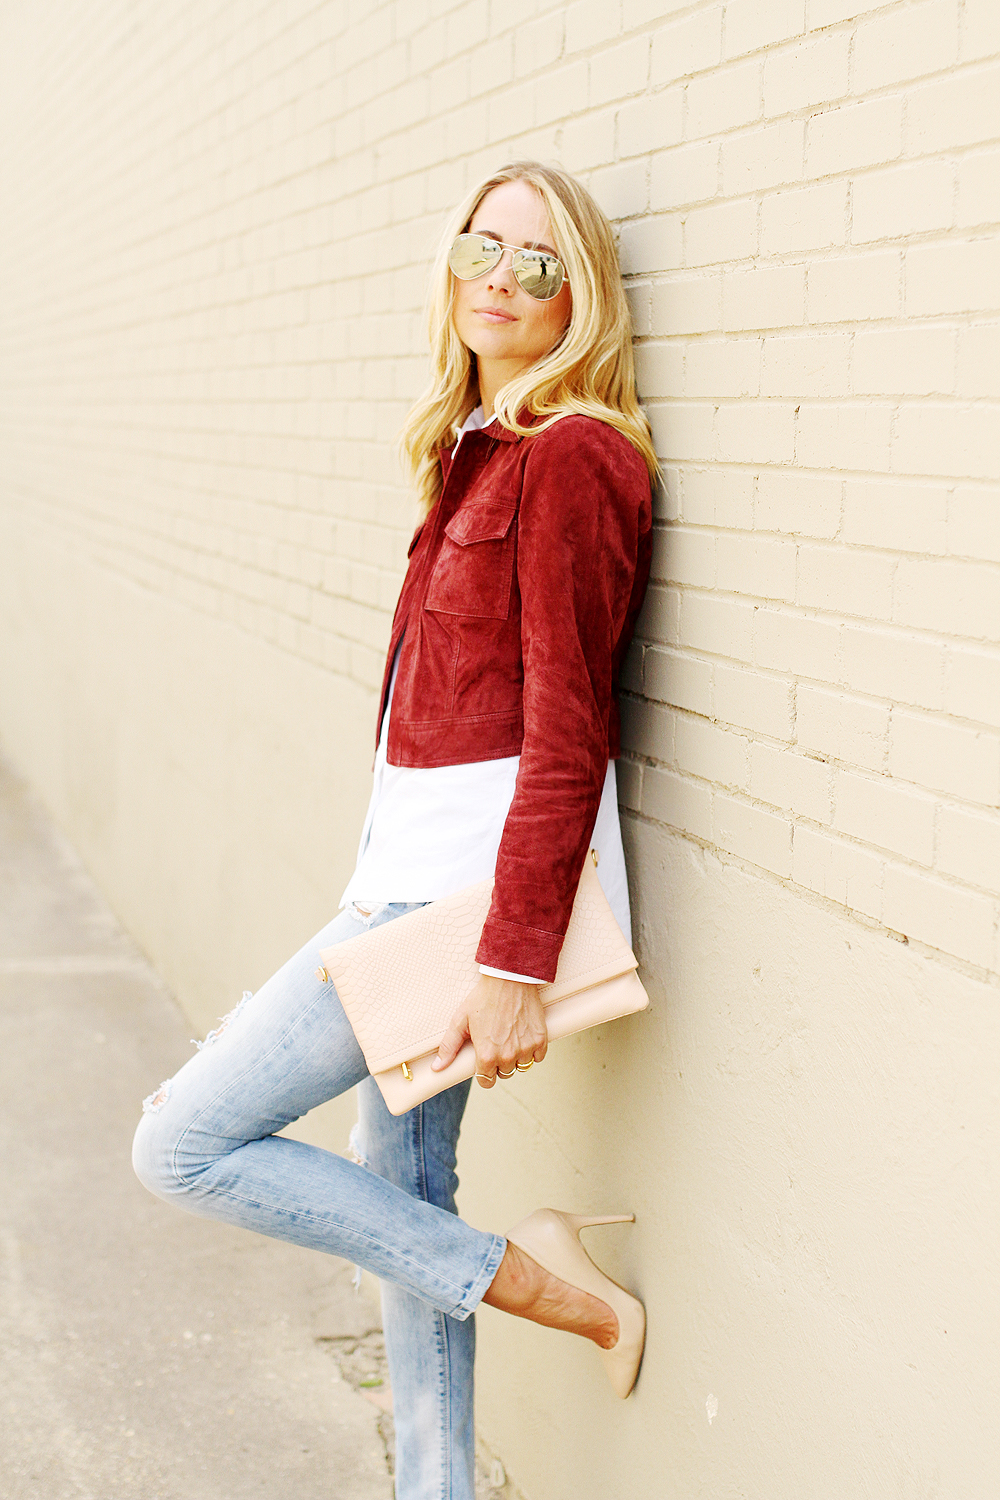 fashion-jackson-ray-ban-silver-aviator-sunglasses-burgundy-suede-jacket-white-button-up-shirt-ripped-skinny-jeans-gigi-new-york-blush-carly-clutch-nude-pumps